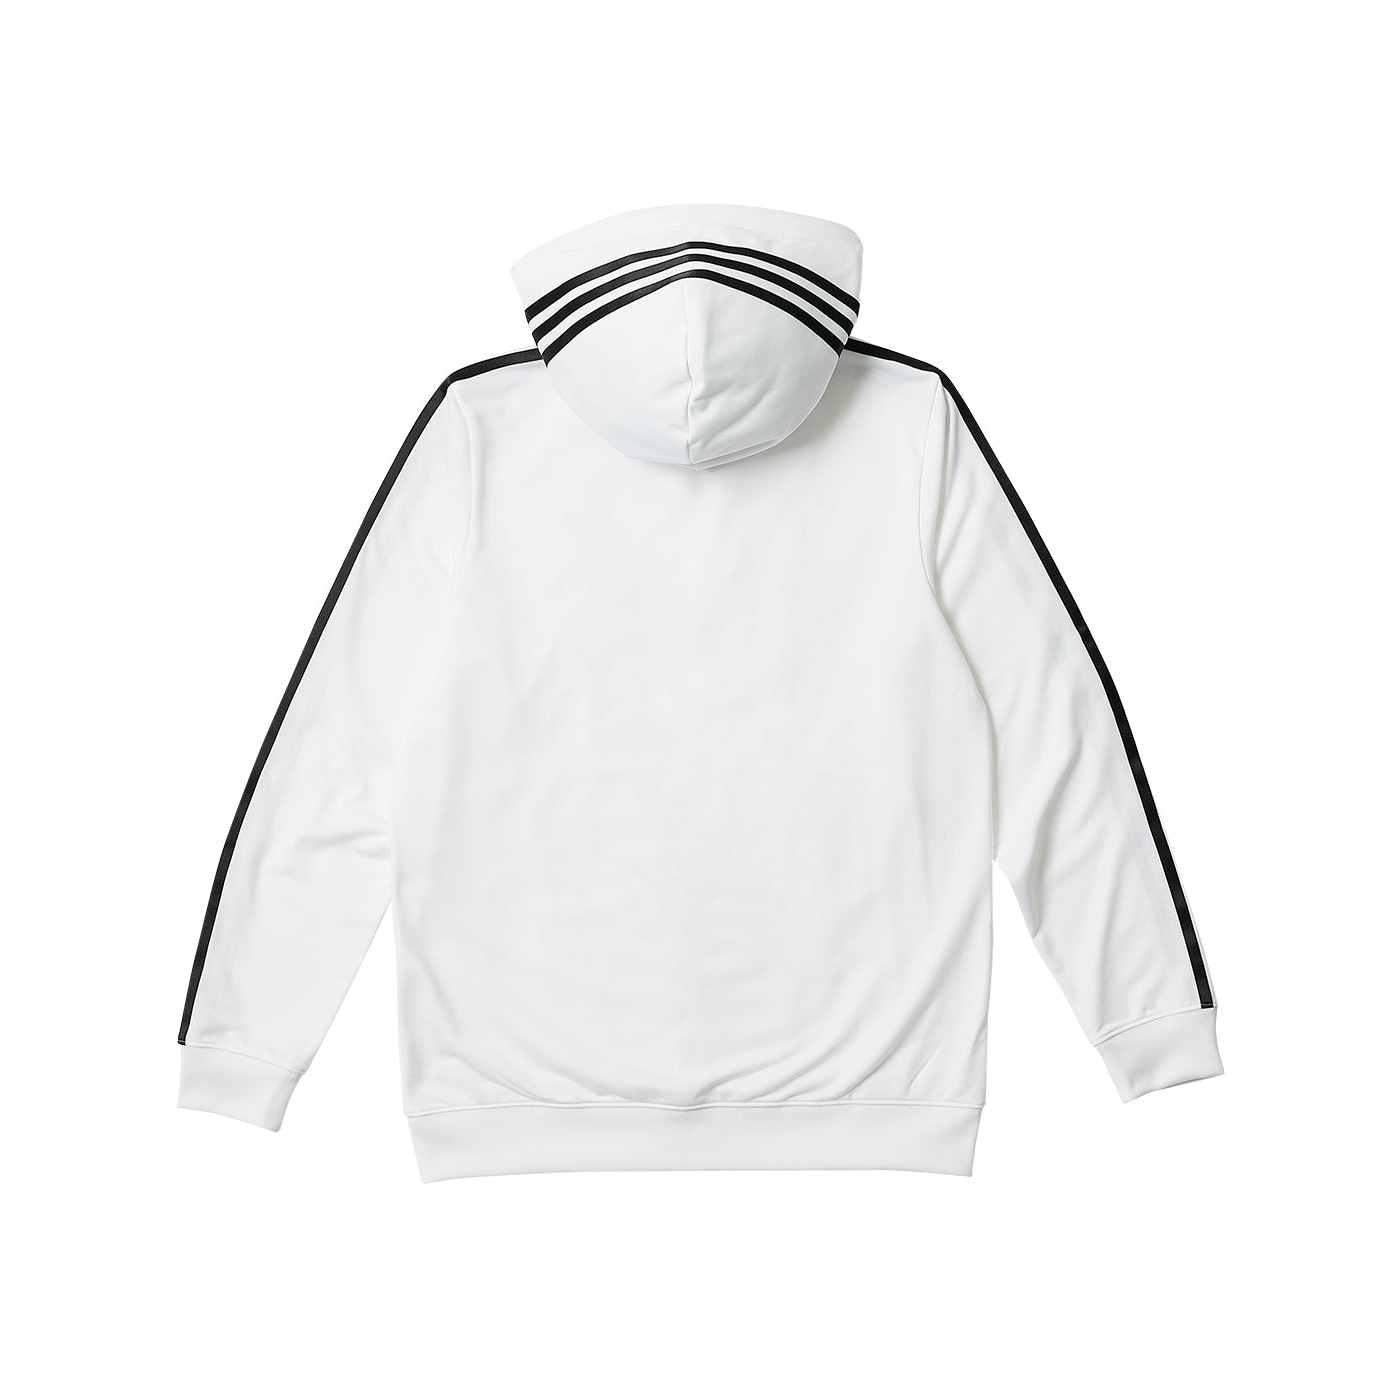 Thumbnail ADIDAS PALACE HOODED FIREBIRD TRACK TOP WHITE one color